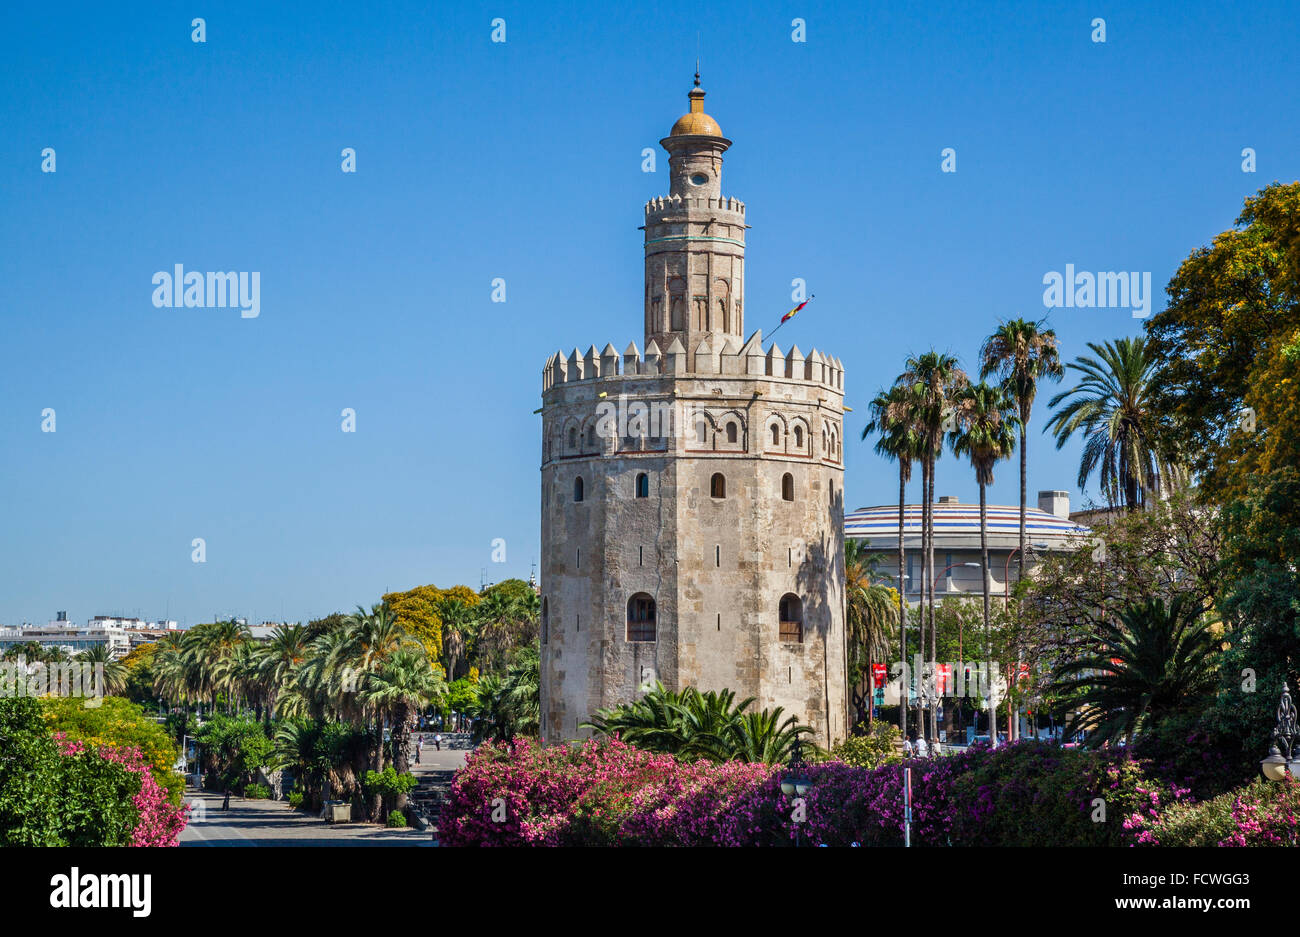 Spain, Andalusia, Province of Seville, Seville, view of Torre del Oro, a 13th century twelve-sided military watchtower on the ba Stock Photo